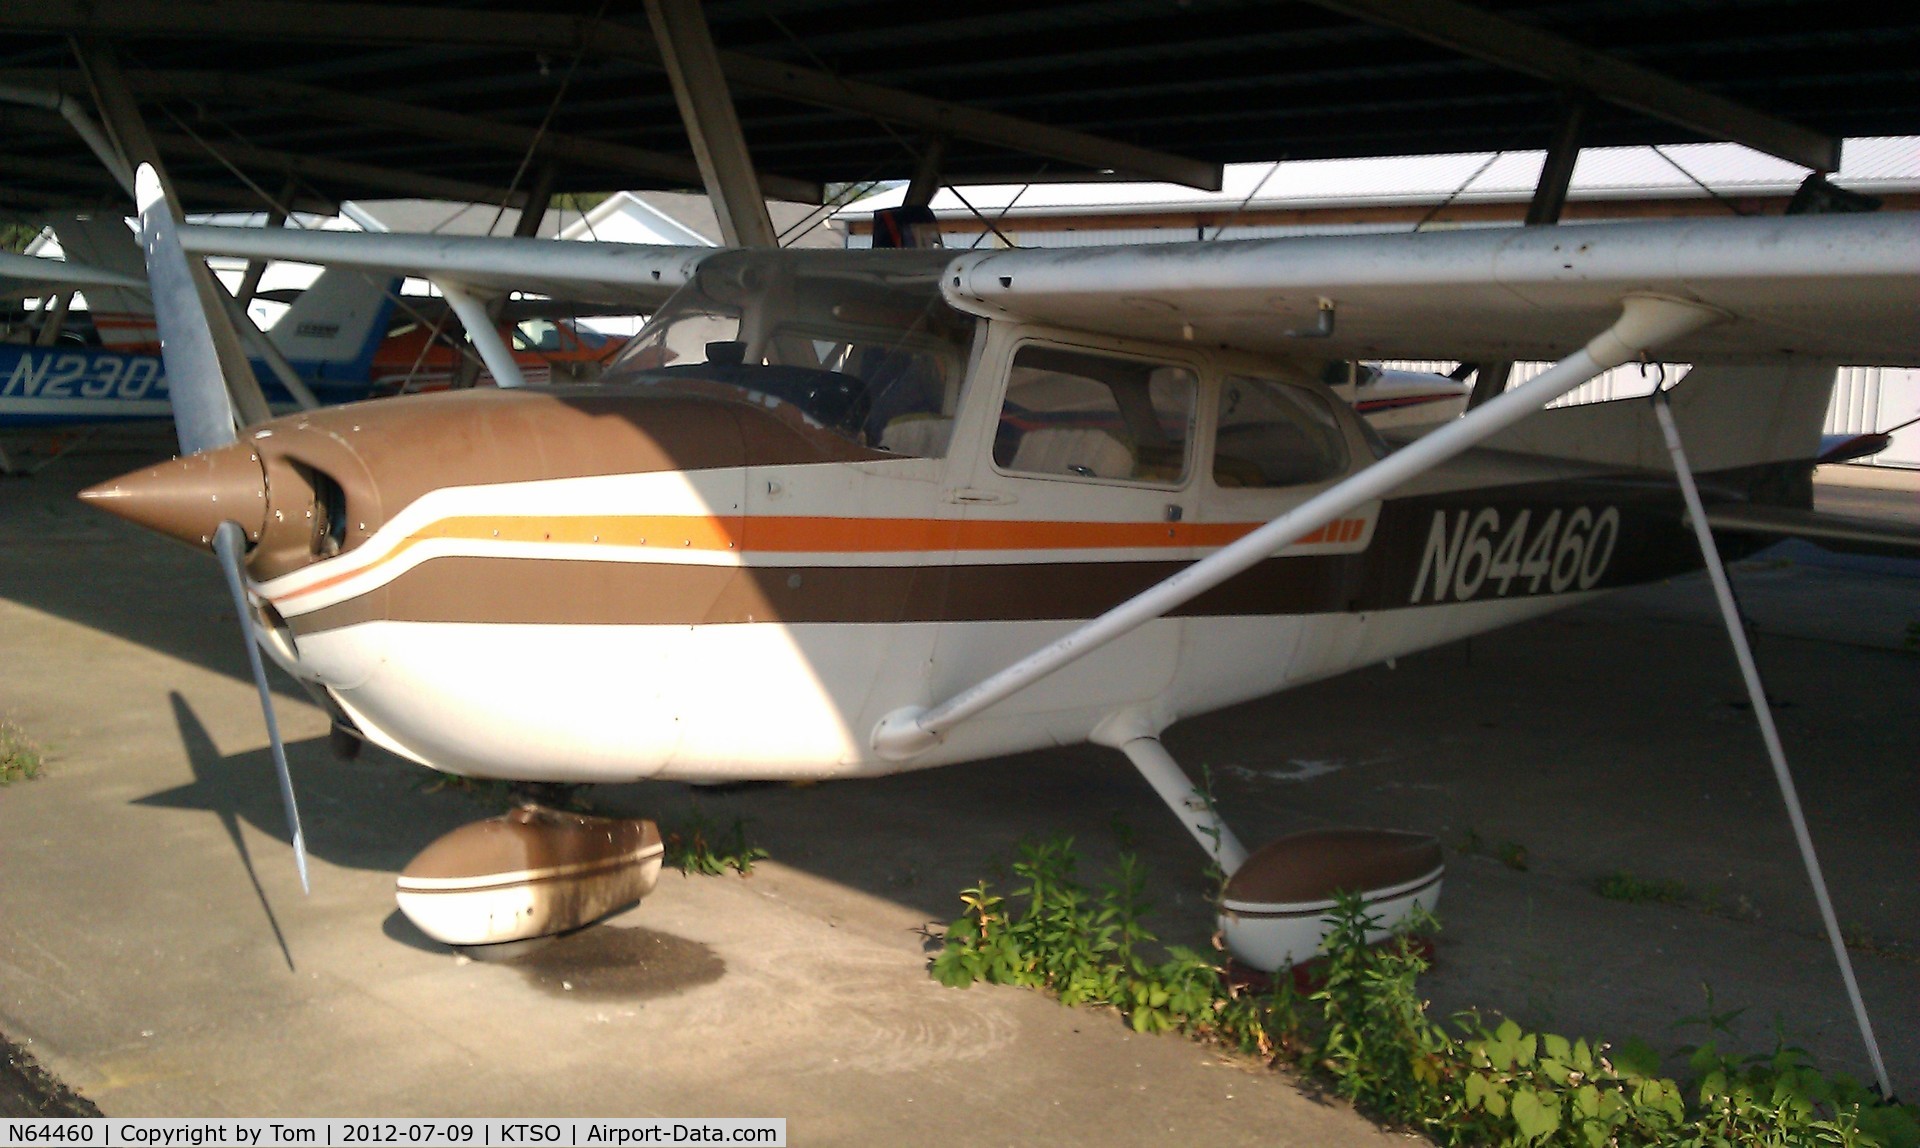 N64460, 1975 Cessna 172M C/N 17265247, Neglected at Carrol County Ohio. KTSO